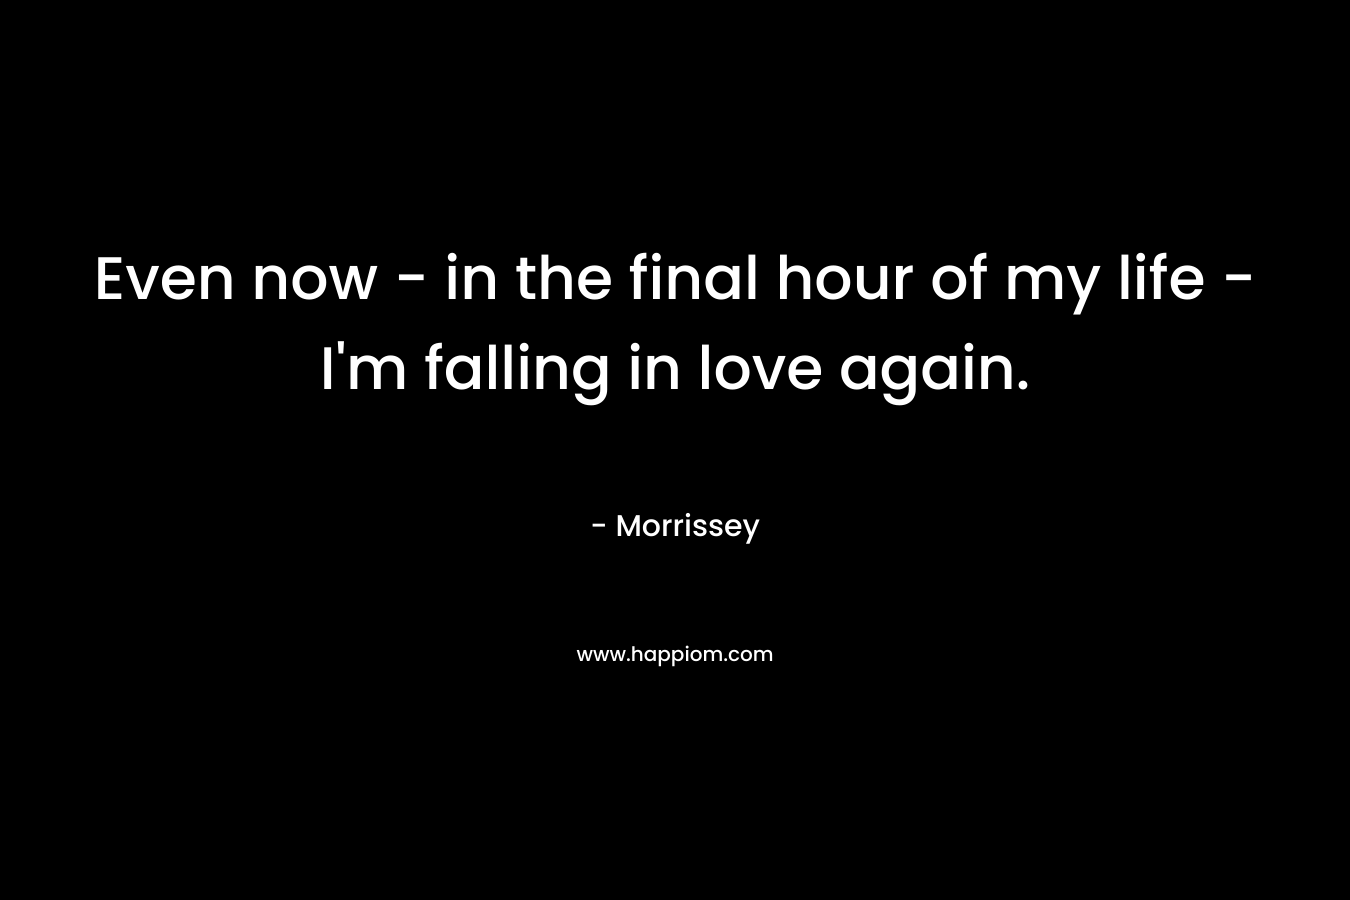 Even now - in the final hour of my life -I'm falling in love again.